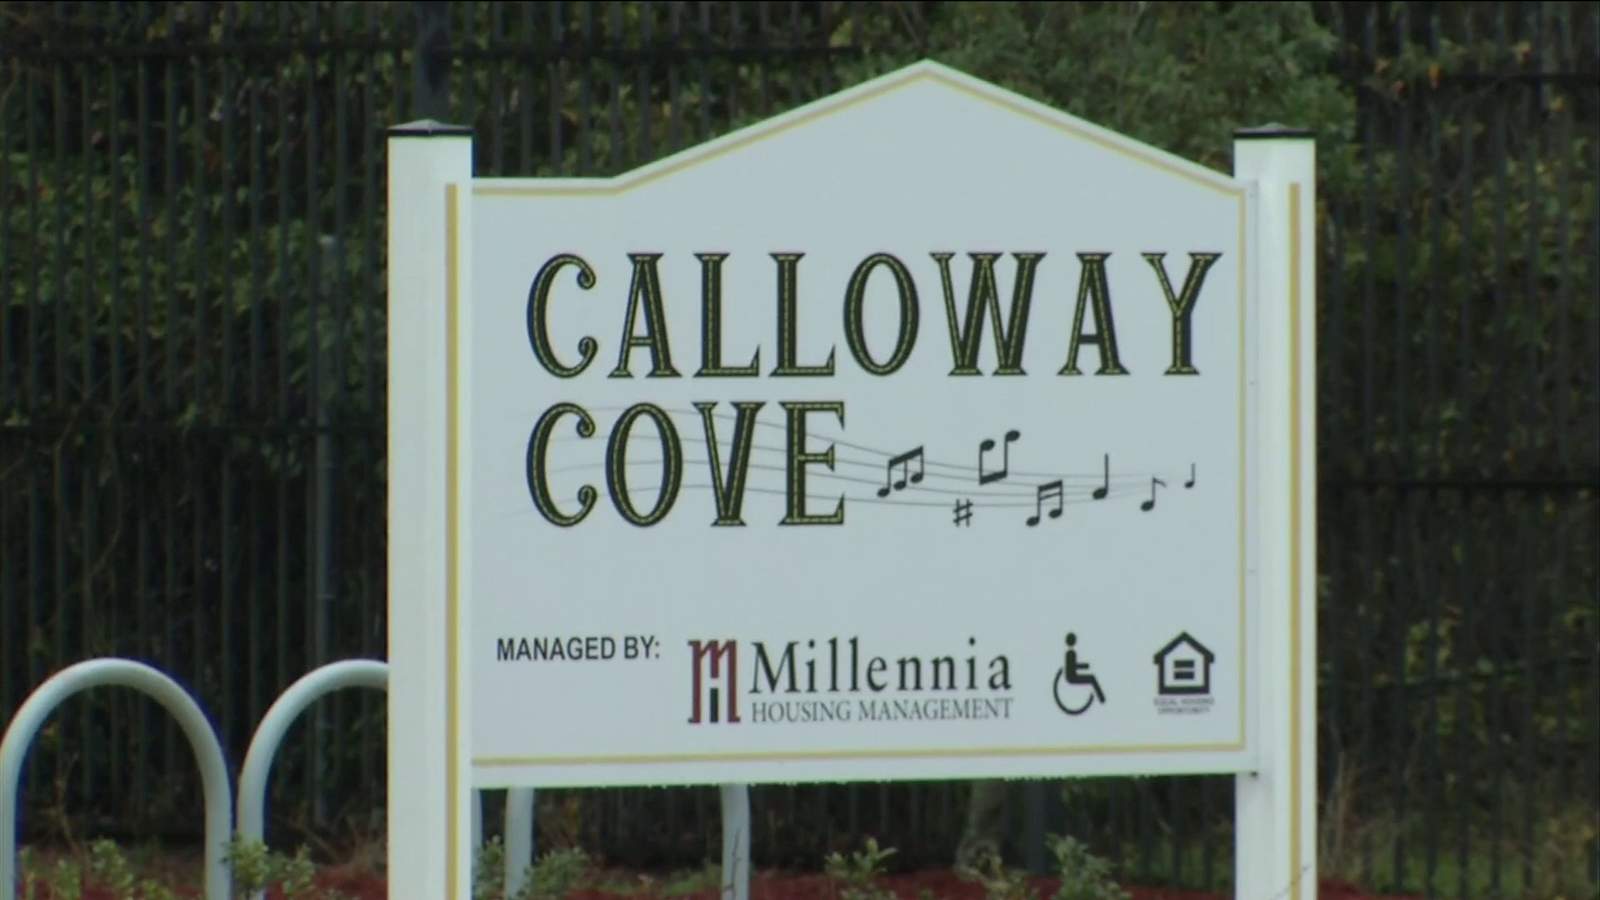 Man killed overnight at Calloway Cove;  4th dead there this week